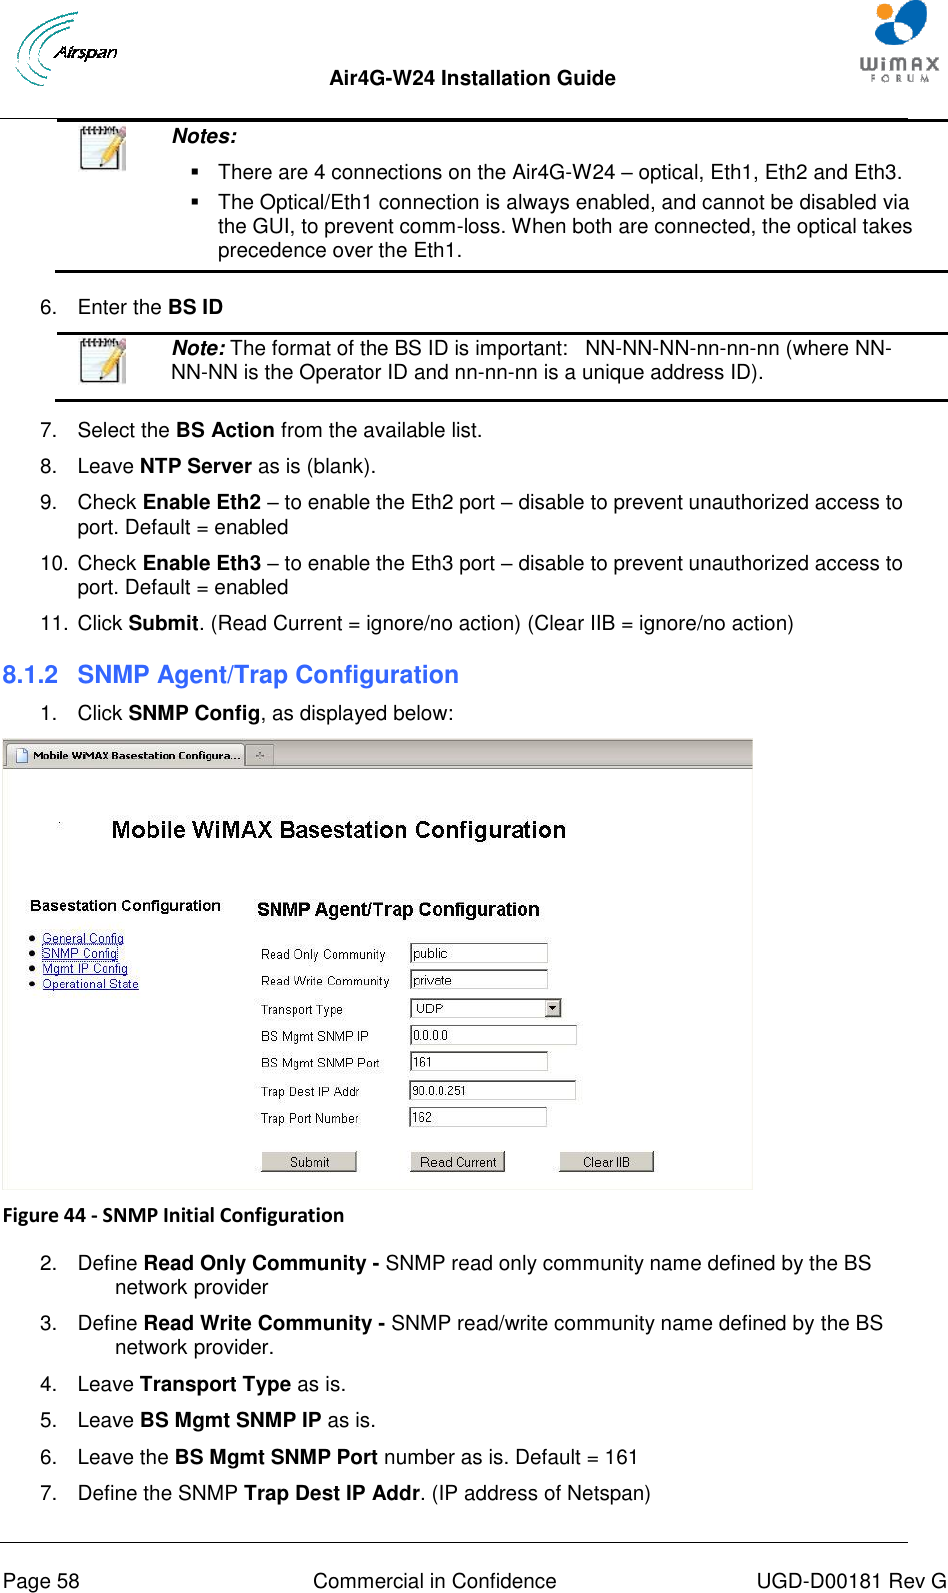  Air4G-W24 Installation Guide       Page 58  Commercial in Confidence  UGD-D00181 Rev G   Notes:    There are 4 connections on the Air4G-W24 – optical, Eth1, Eth2 and Eth3.   The Optical/Eth1 connection is always enabled, and cannot be disabled via the GUI, to prevent comm-loss. When both are connected, the optical takes precedence over the Eth1.  6.  Enter the BS ID   Note: The format of the BS ID is important:   NN-NN-NN-nn-nn-nn (where NN-NN-NN is the Operator ID and nn-nn-nn is a unique address ID).  7.  Select the BS Action from the available list. 8.  Leave NTP Server as is (blank). 9.  Check Enable Eth2 – to enable the Eth2 port – disable to prevent unauthorized access to port. Default = enabled 10. Check Enable Eth3 – to enable the Eth3 port – disable to prevent unauthorized access to port. Default = enabled 11. Click Submit. (Read Current = ignore/no action) (Clear IIB = ignore/no action) 8.1.2  SNMP Agent/Trap Configuration 1.  Click SNMP Config, as displayed below:  Figure 44 - SNMP Initial Configuration  2.  Define Read Only Community - SNMP read only community name defined by the BS network provider 3.  Define Read Write Community - SNMP read/write community name defined by the BS network provider. 4.  Leave Transport Type as is. 5.  Leave BS Mgmt SNMP IP as is. 6.  Leave the BS Mgmt SNMP Port number as is. Default = 161 7.  Define the SNMP Trap Dest IP Addr. (IP address of Netspan) 